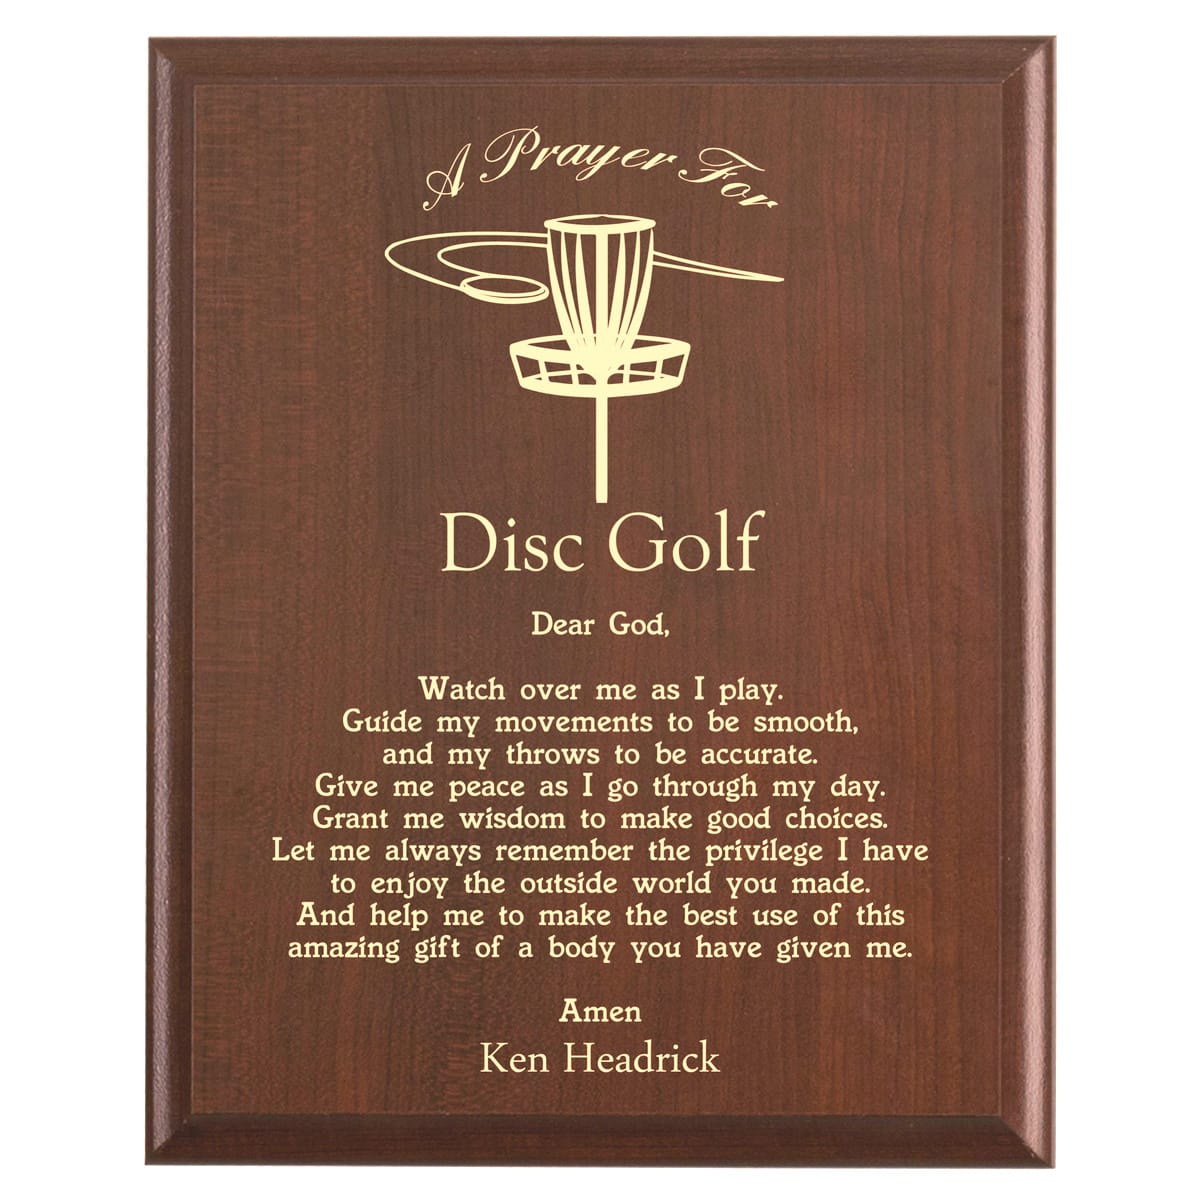 Plaque photo: Disc Golfer Prayer Plaque design with free personalization. Wood style finish with customized text.